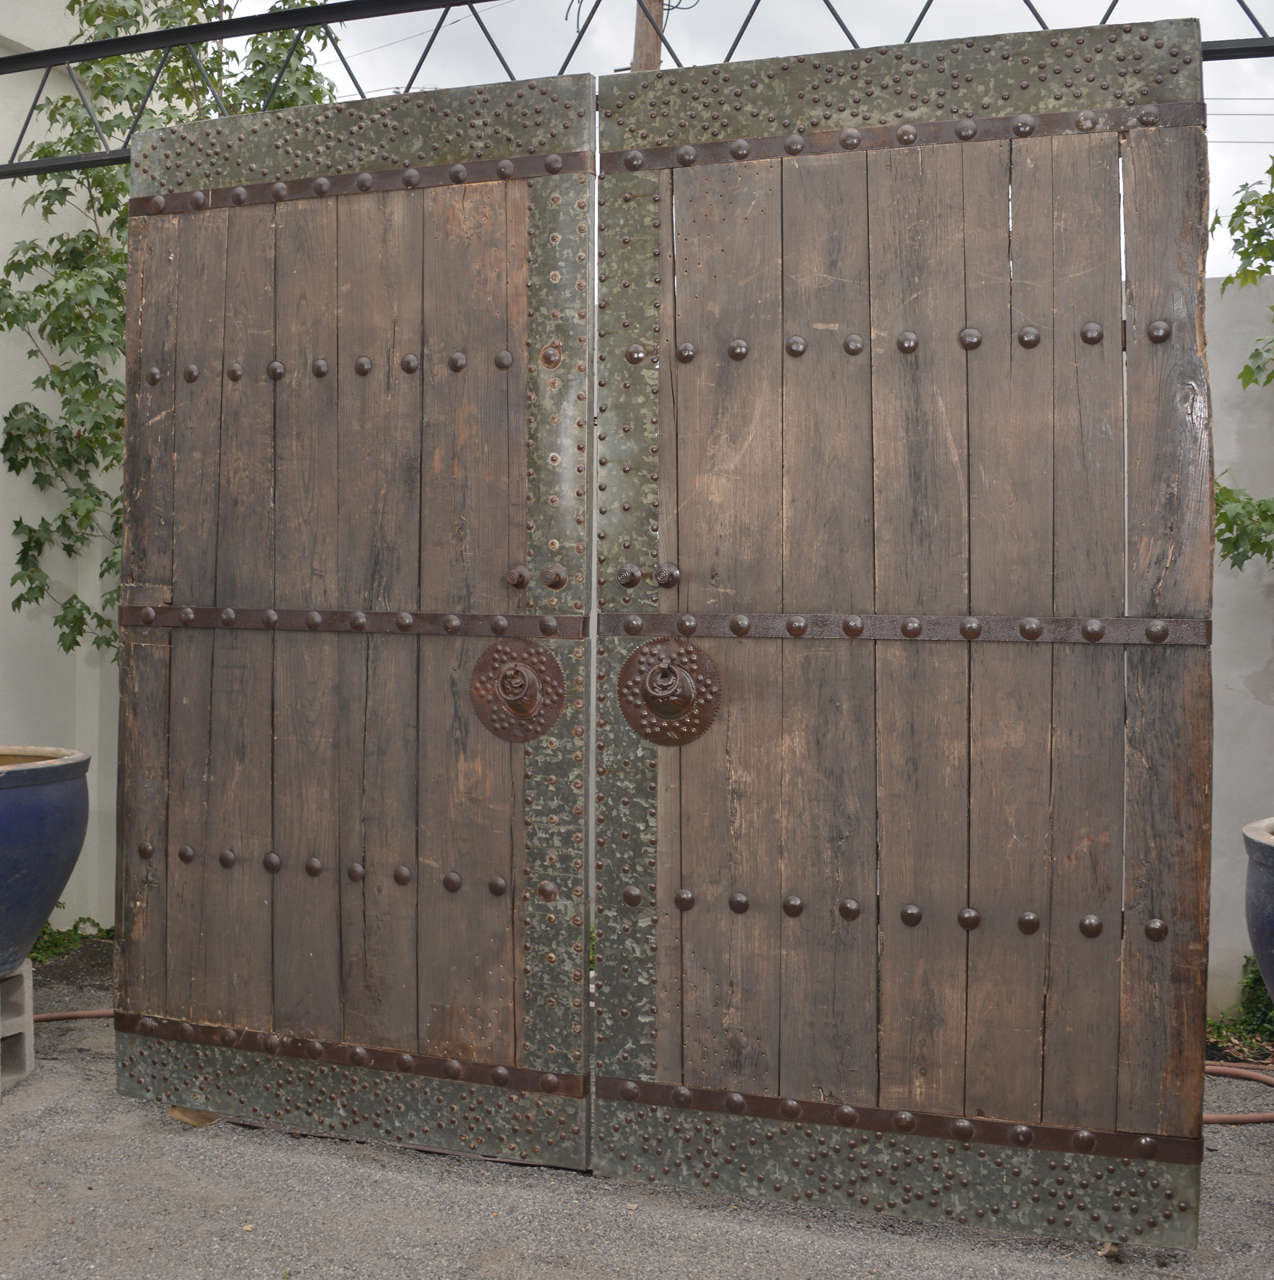 Weathered Elm Courtyard Doors
Pair of Antique Elm Doors with Studded Hardware Trim
 These doors came from a traditional Asian “quadrangle house.” 
Quadrangle houses are defined by their central courtyard. The courtyard was the 
entrance way for